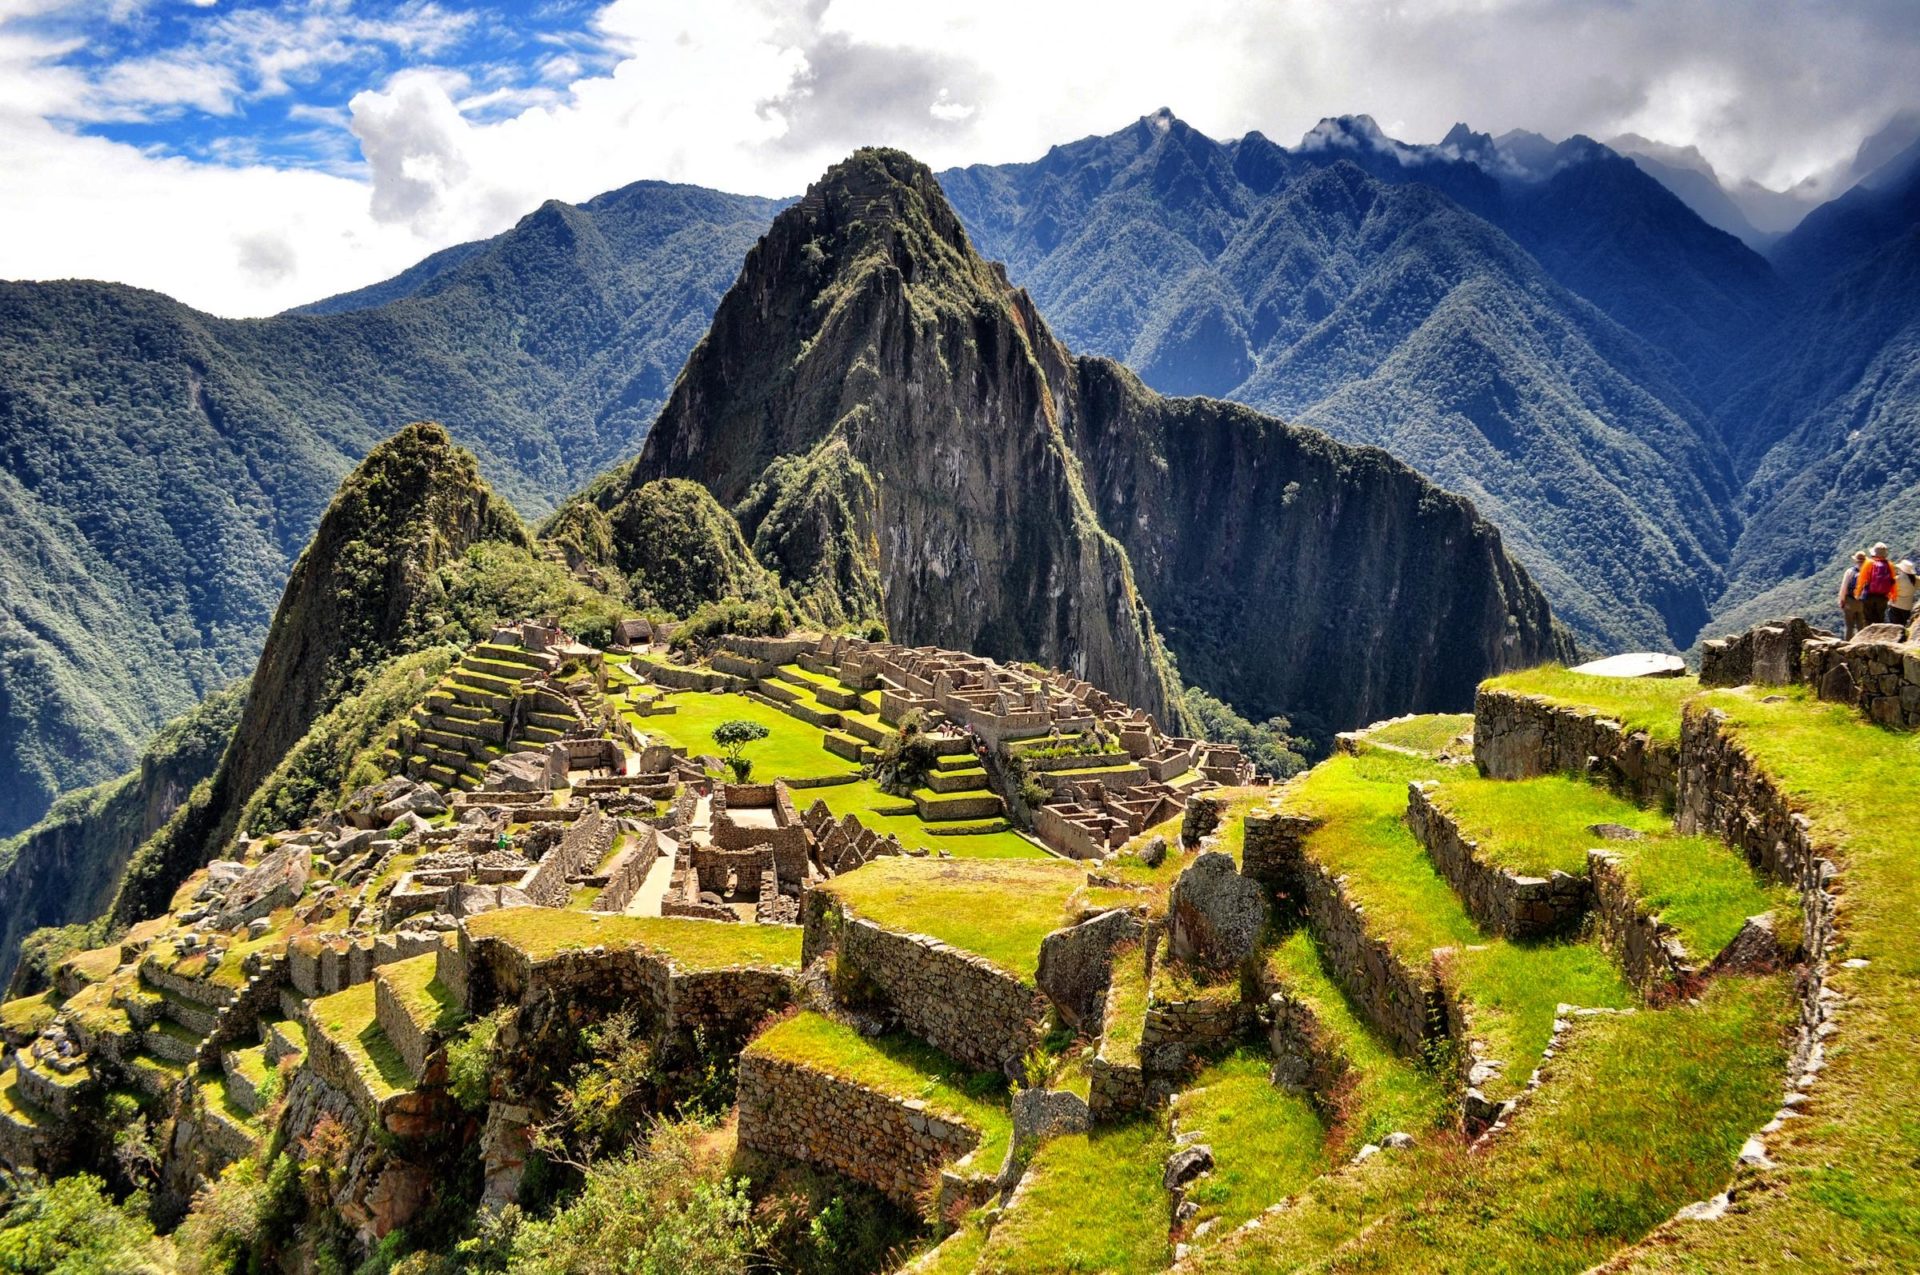 Machu Picchu Peru: We find the “Lost City of The Incas” right where they left it.